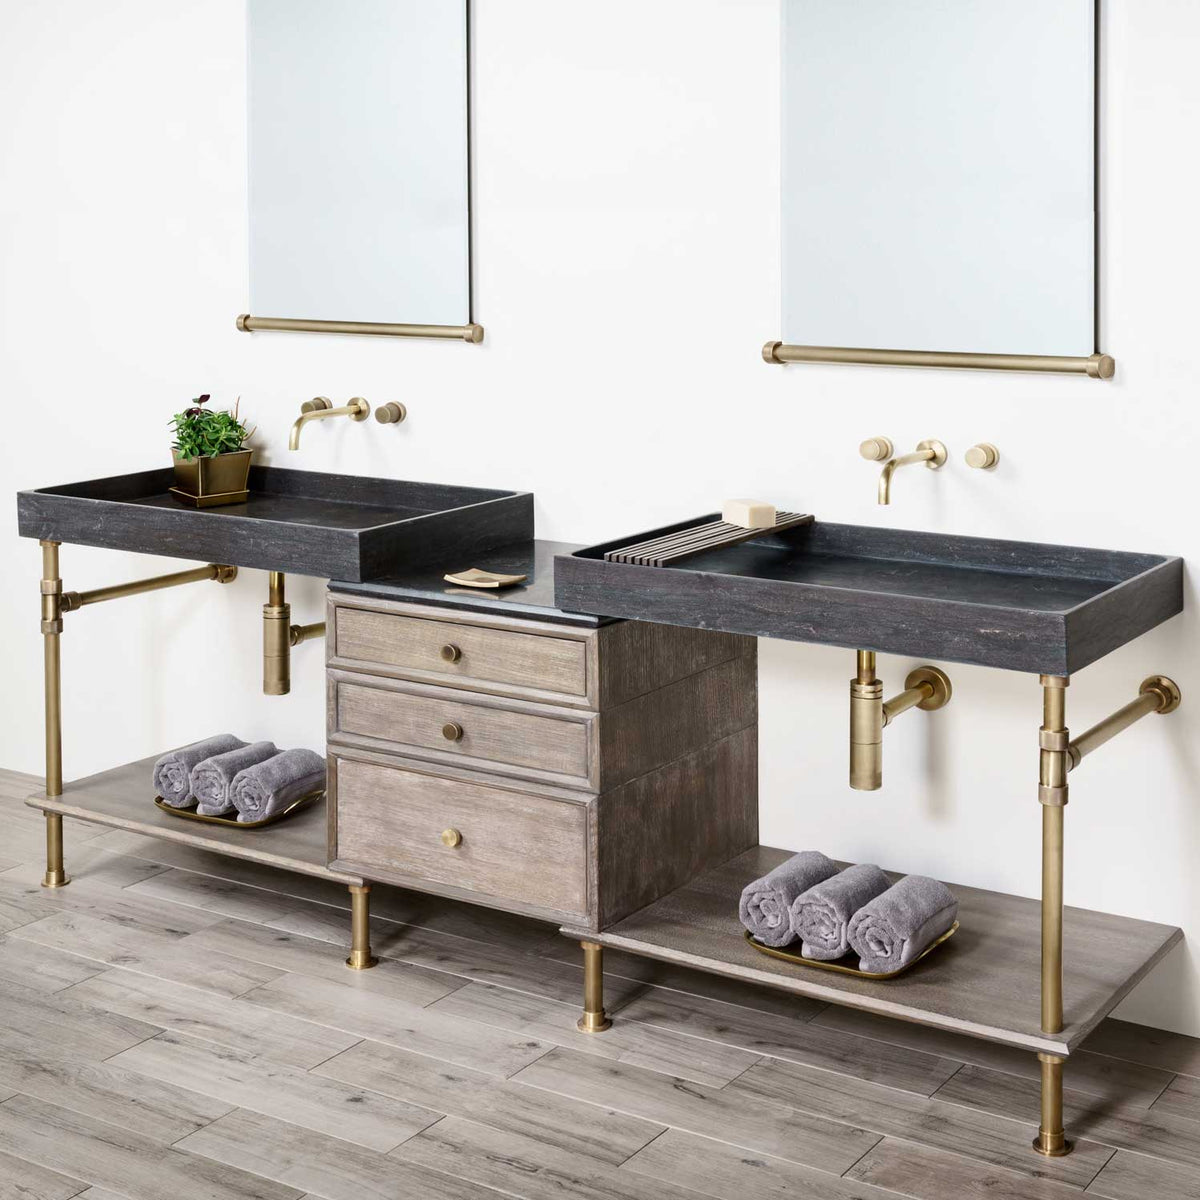 Double Elemental Vanity set.  Shown with Watermark Faucets image 1 of 2